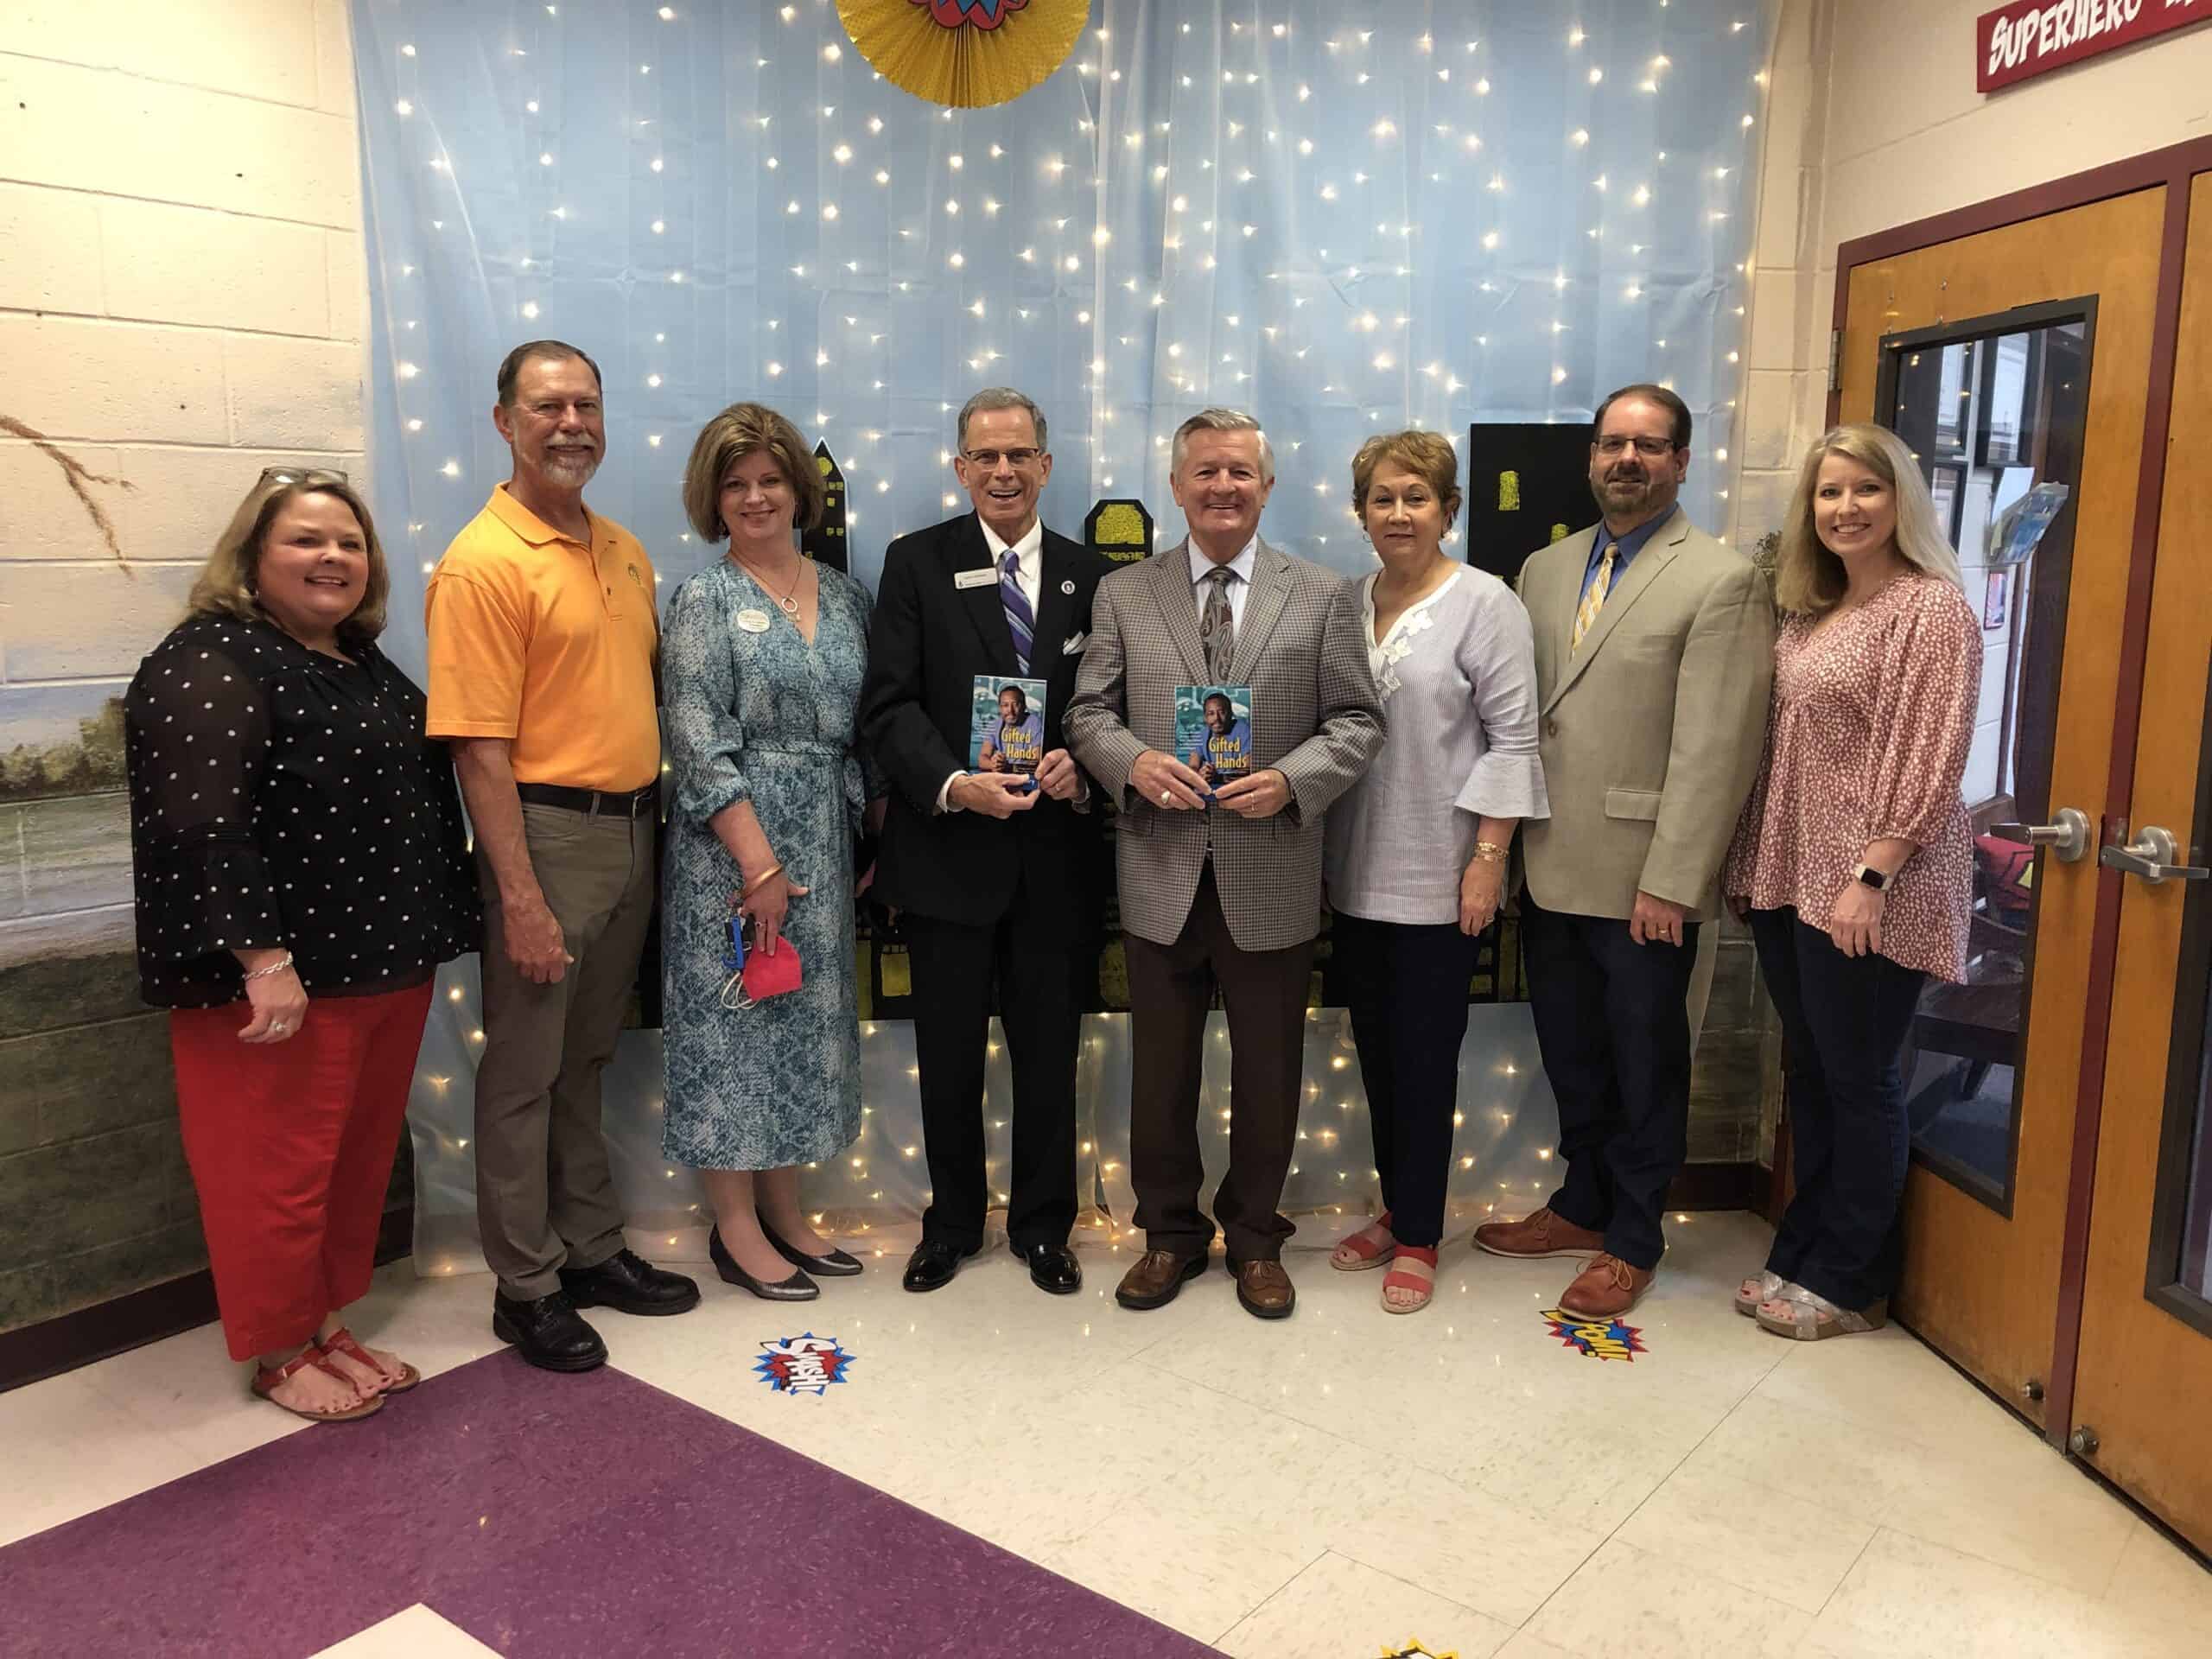 Members of OFTC, the Dublin and Cochran Rotary Clubs, Bleckley County Superintendent, and Bleckley County Elementary School Principal and Assistant Principal gathered for a photo prior to handing out the book Gifted Hands to 180 fifth grade students at Bleckley County Elementary School.